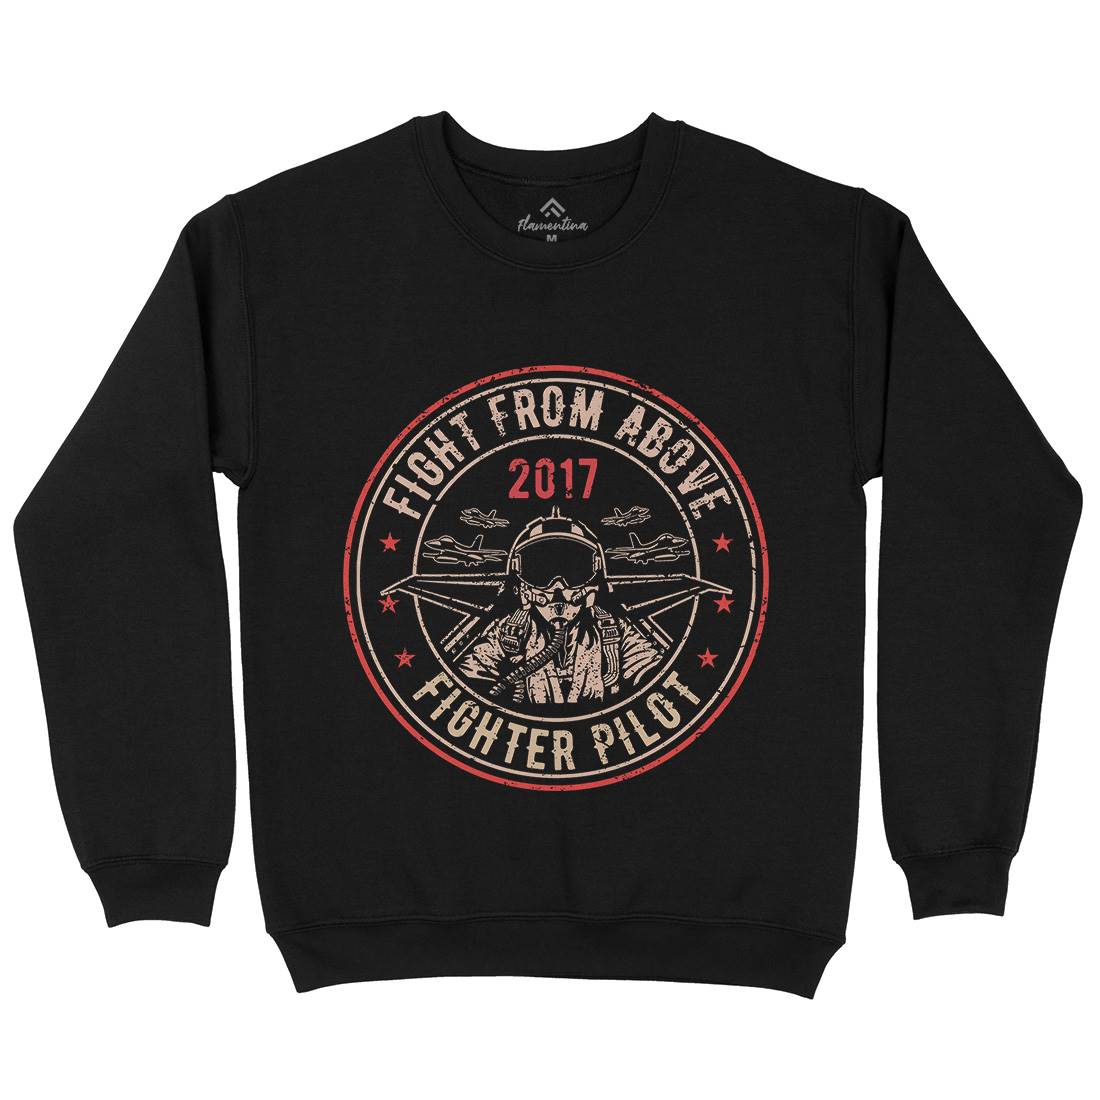 Death From Above Kids Crew Neck Sweatshirt Army A043